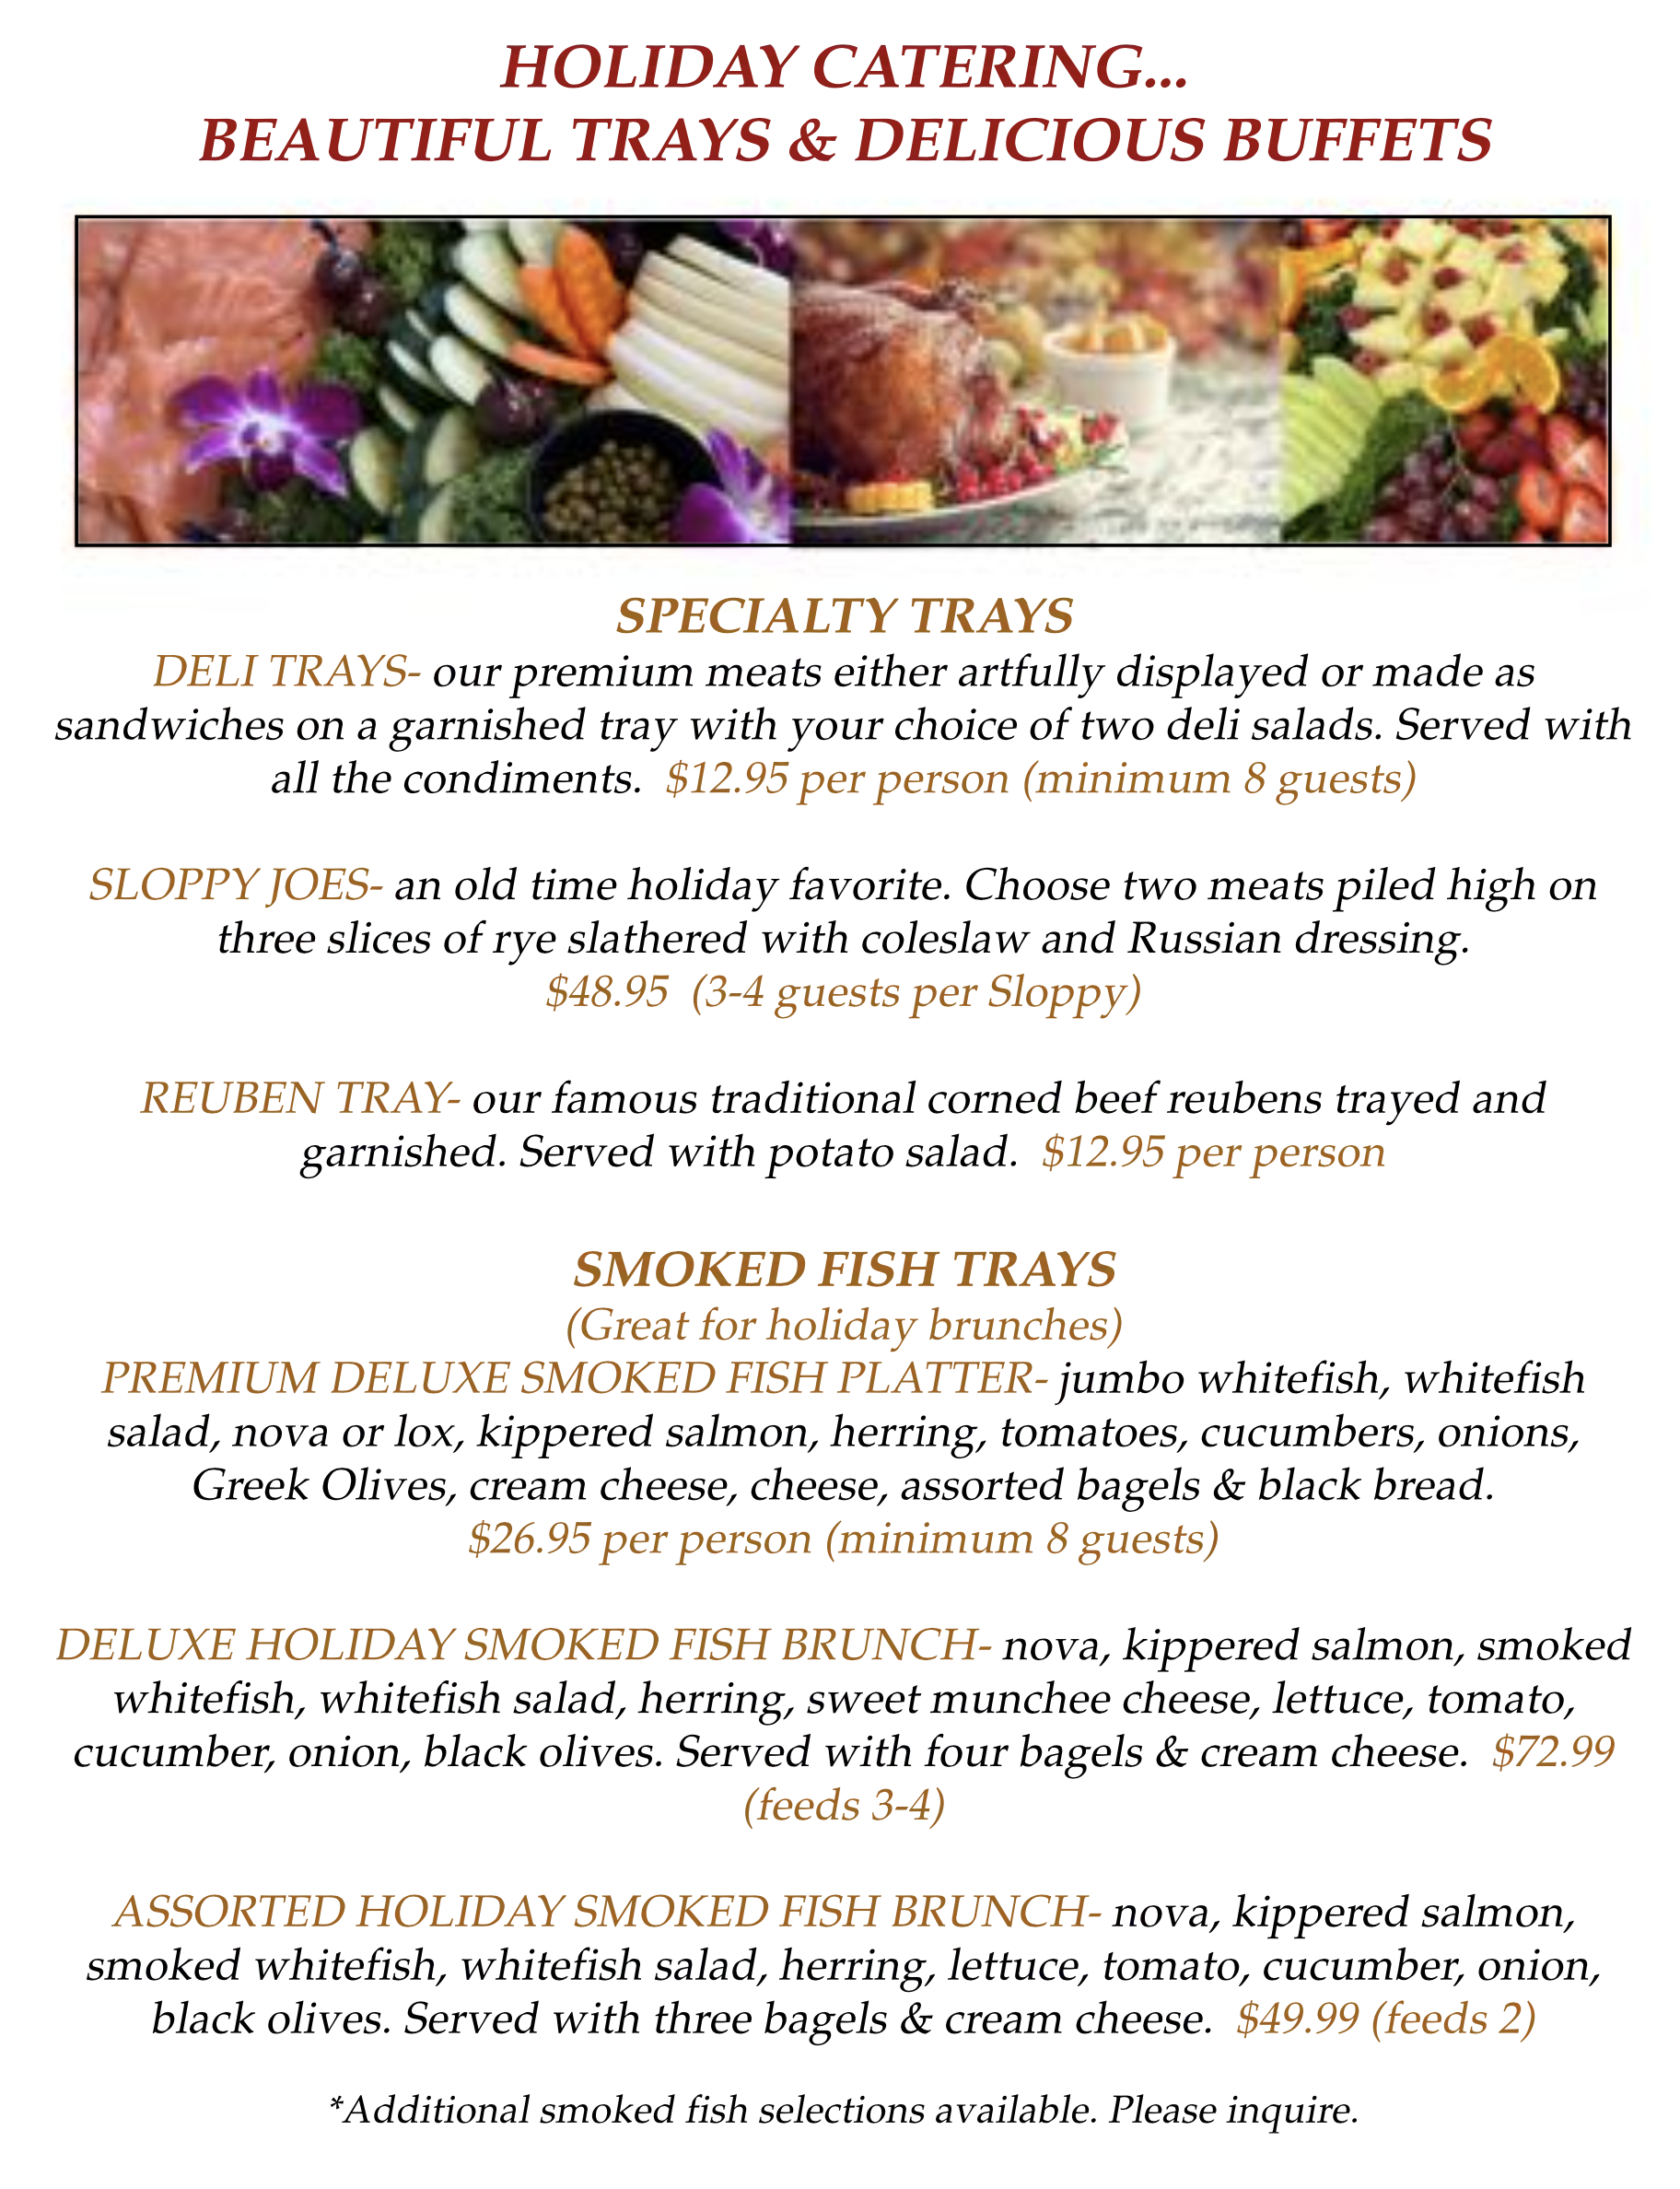 View Our Chanukah and Christmas Menu